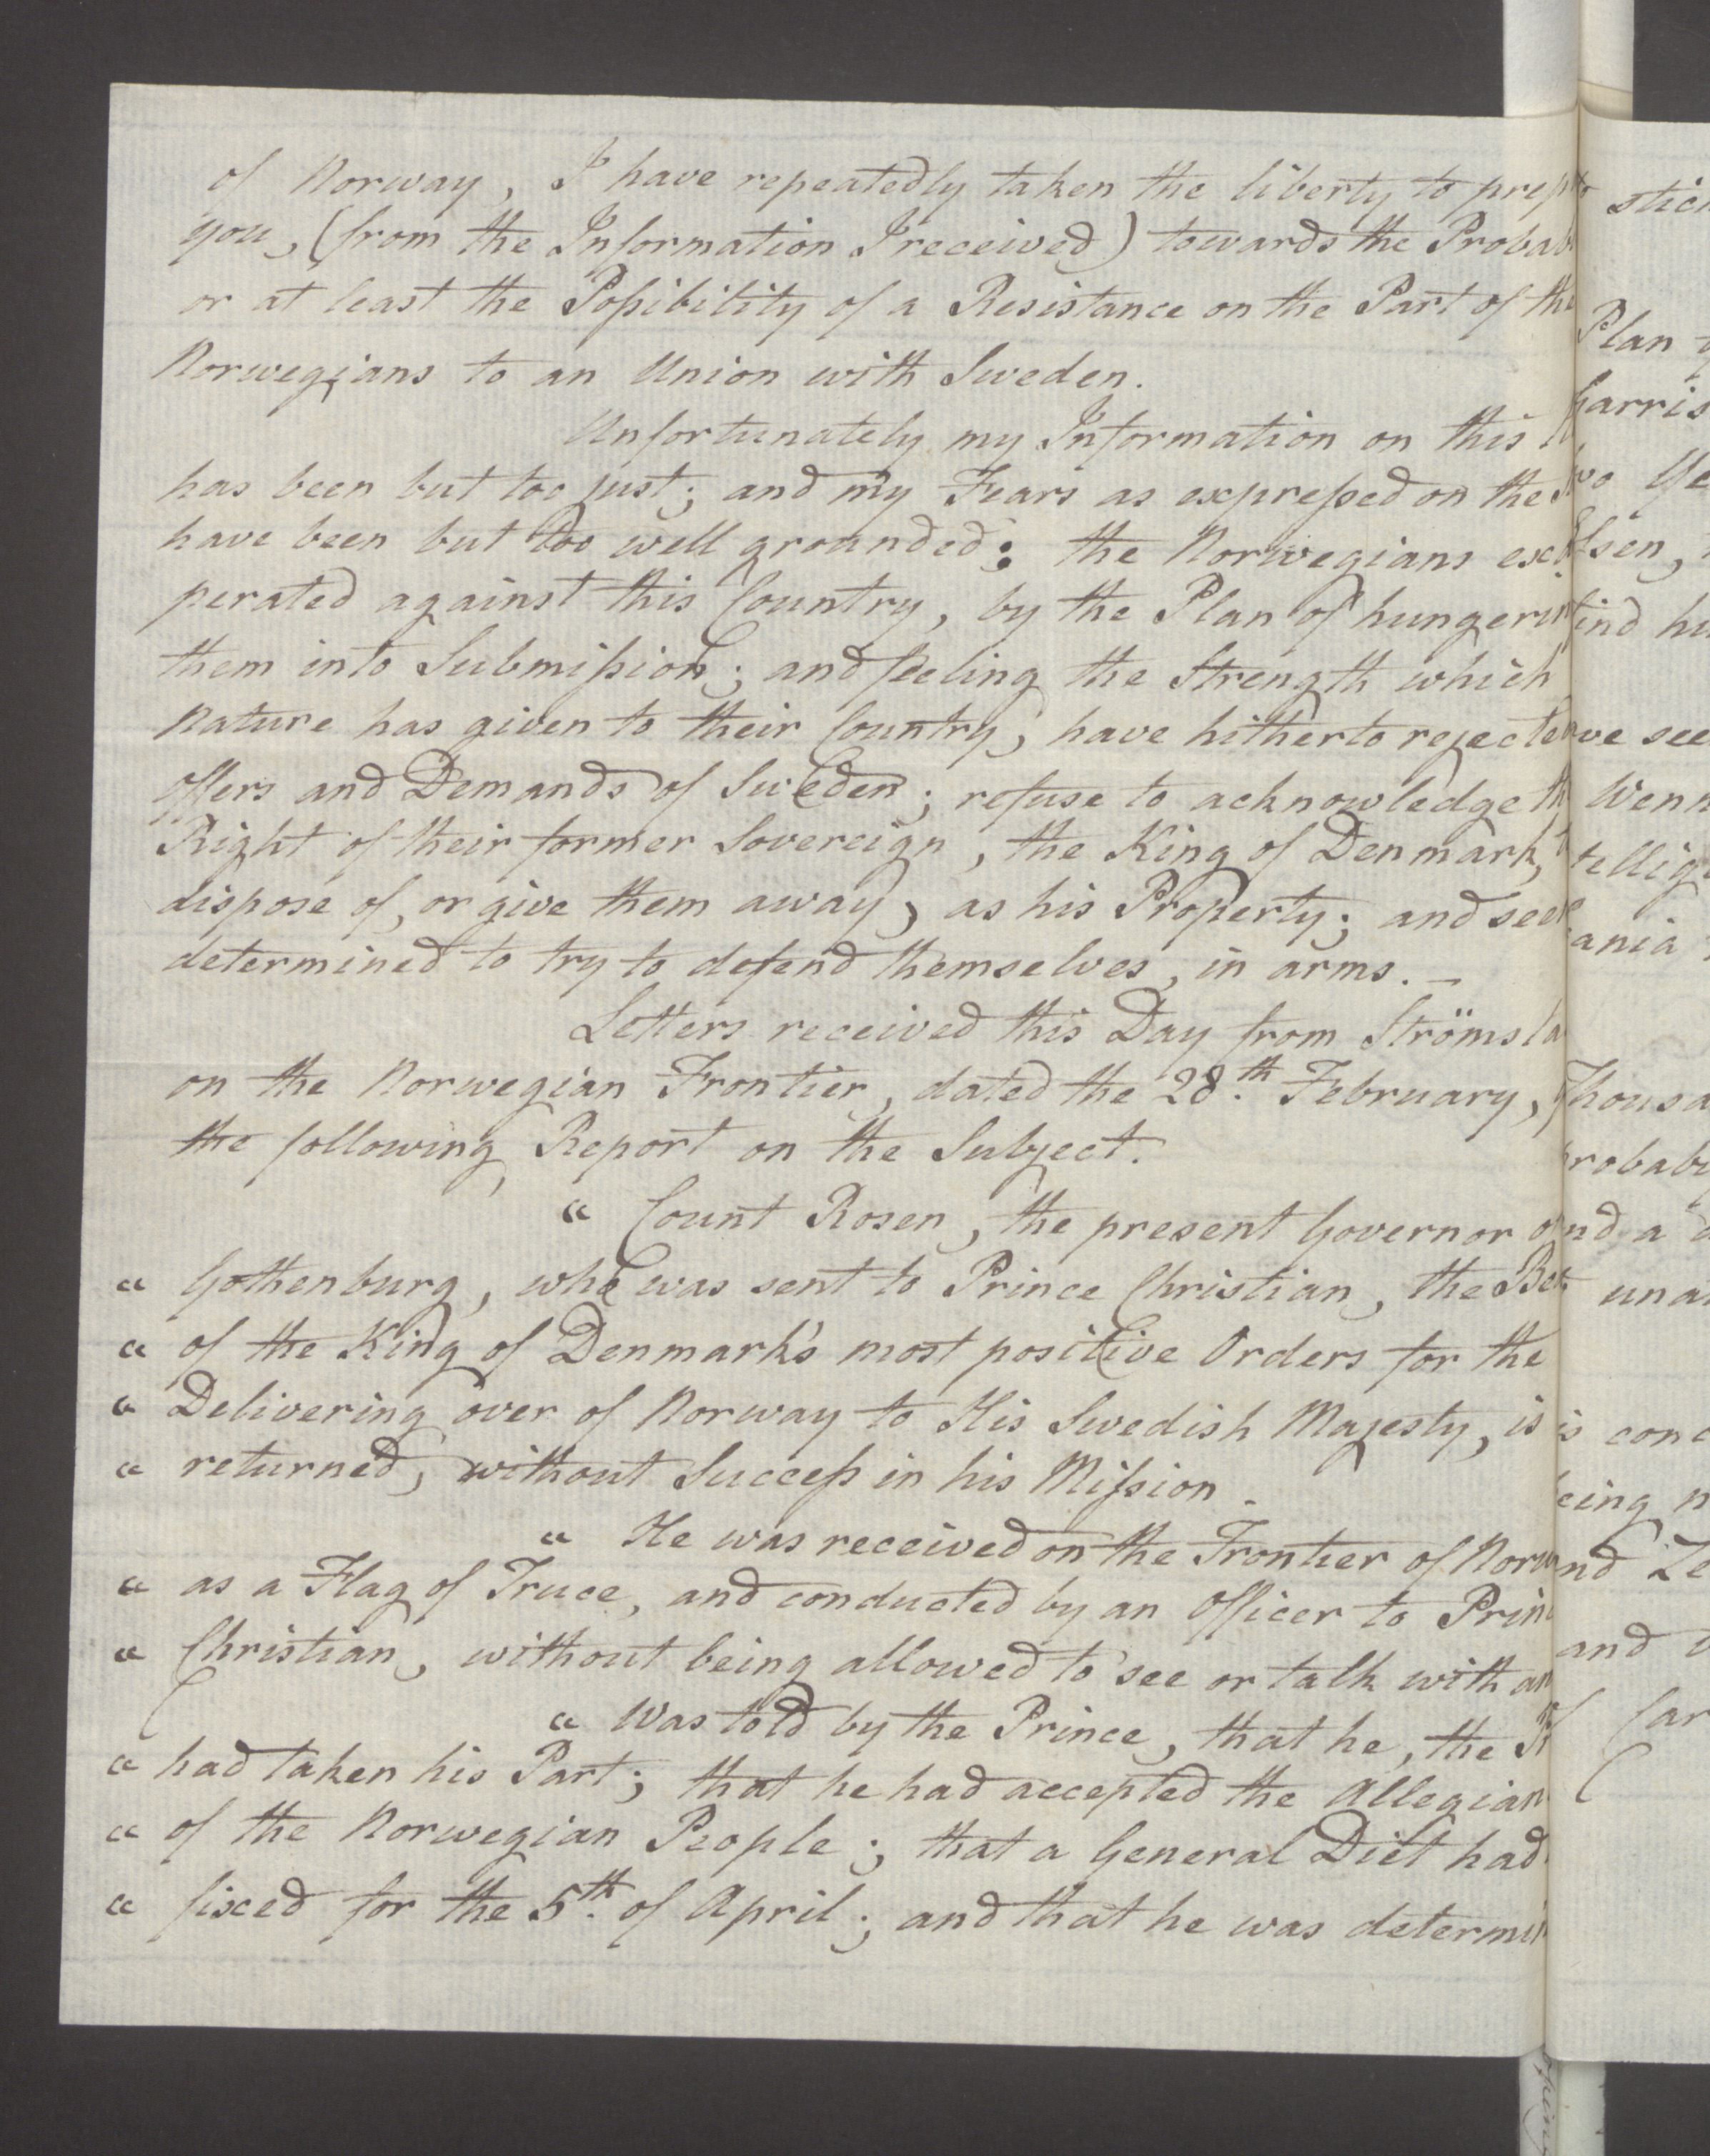 Foreign Office*, UKA/-/FO 38/16: Sir C. Gordon. Reports from Malmö, Jonkoping, and Helsingborg, 1814, p. 19